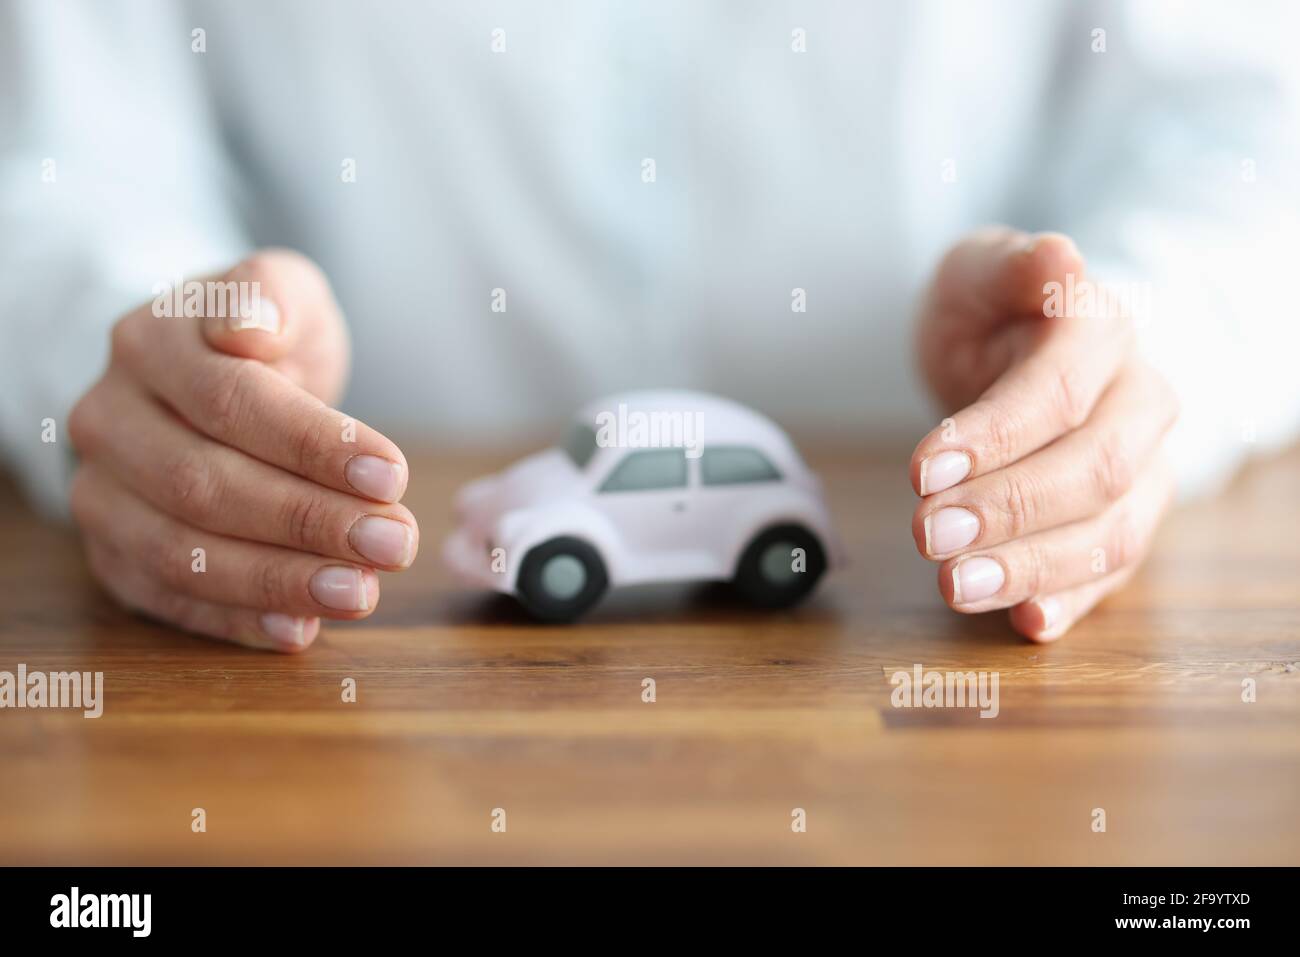 There is white car inside woman hands Stock Photo